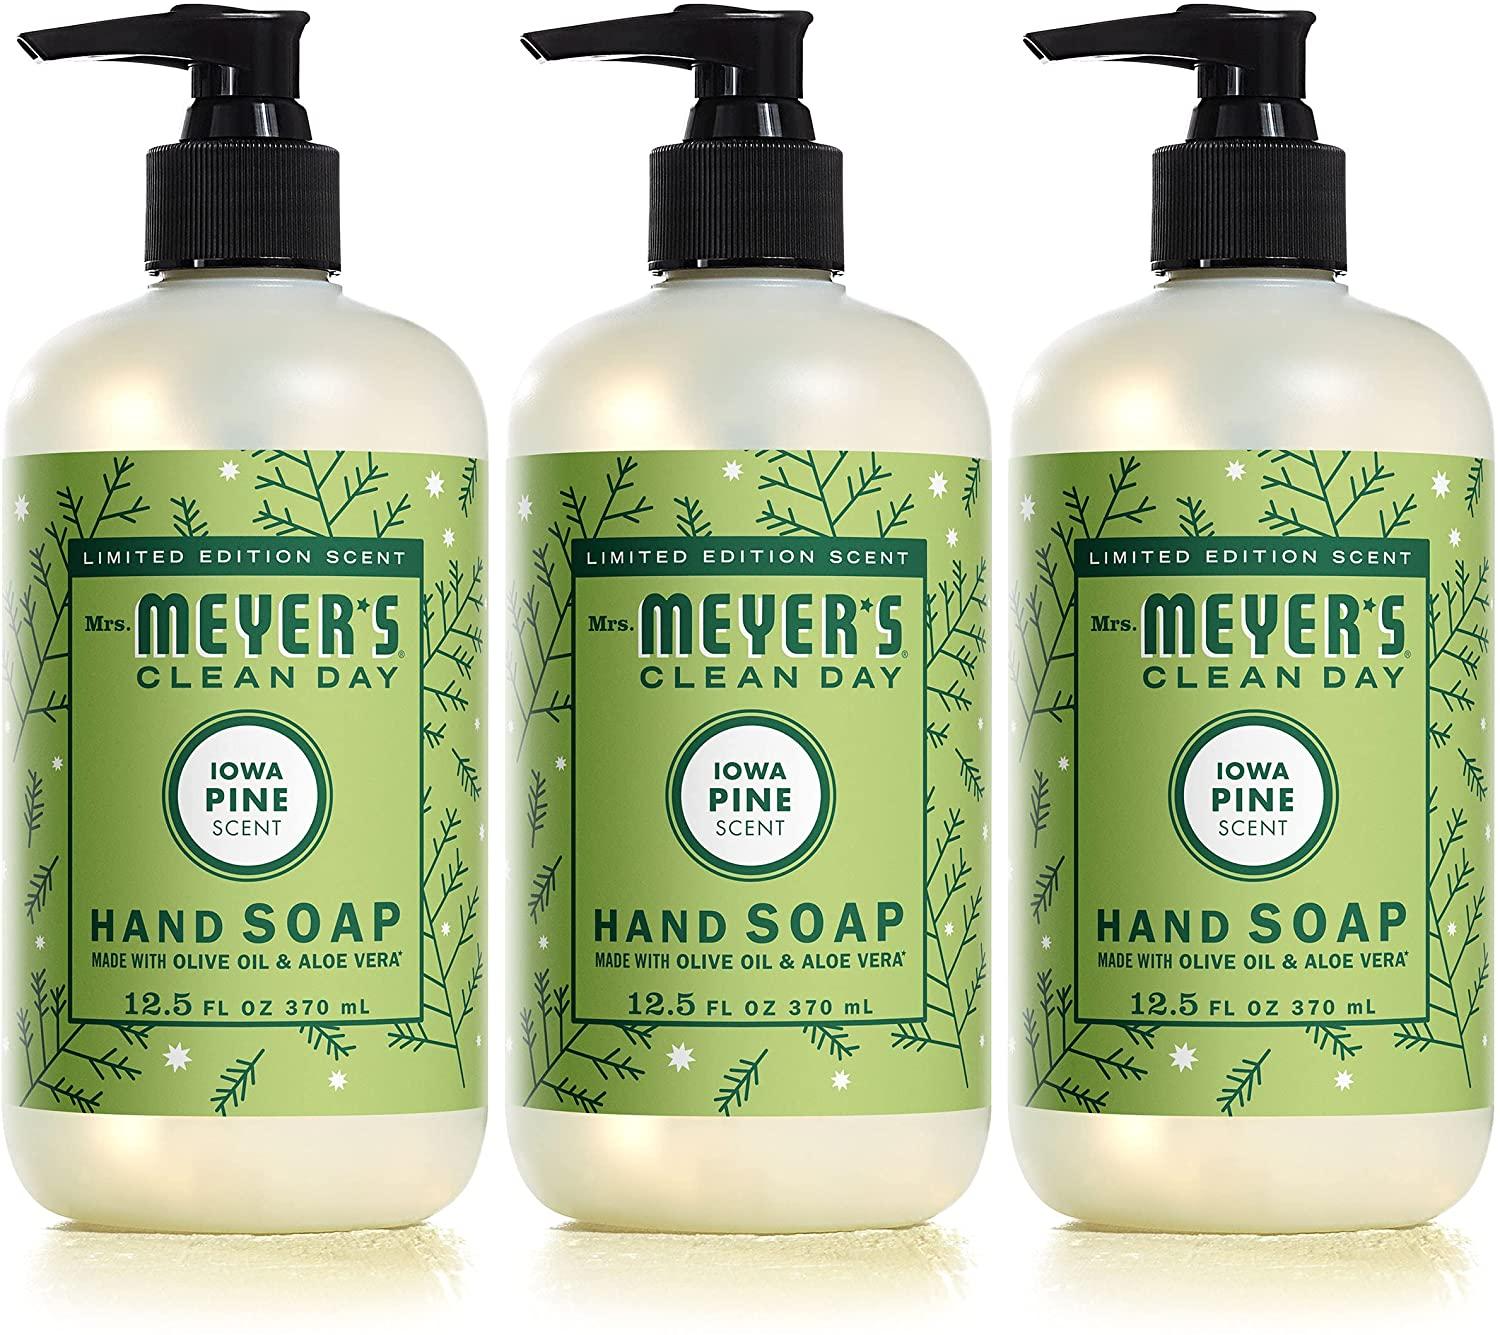 3 Mrs Meyers Clean Day Iowa Pine Liquid Hand Soap for $9.99 Shipped